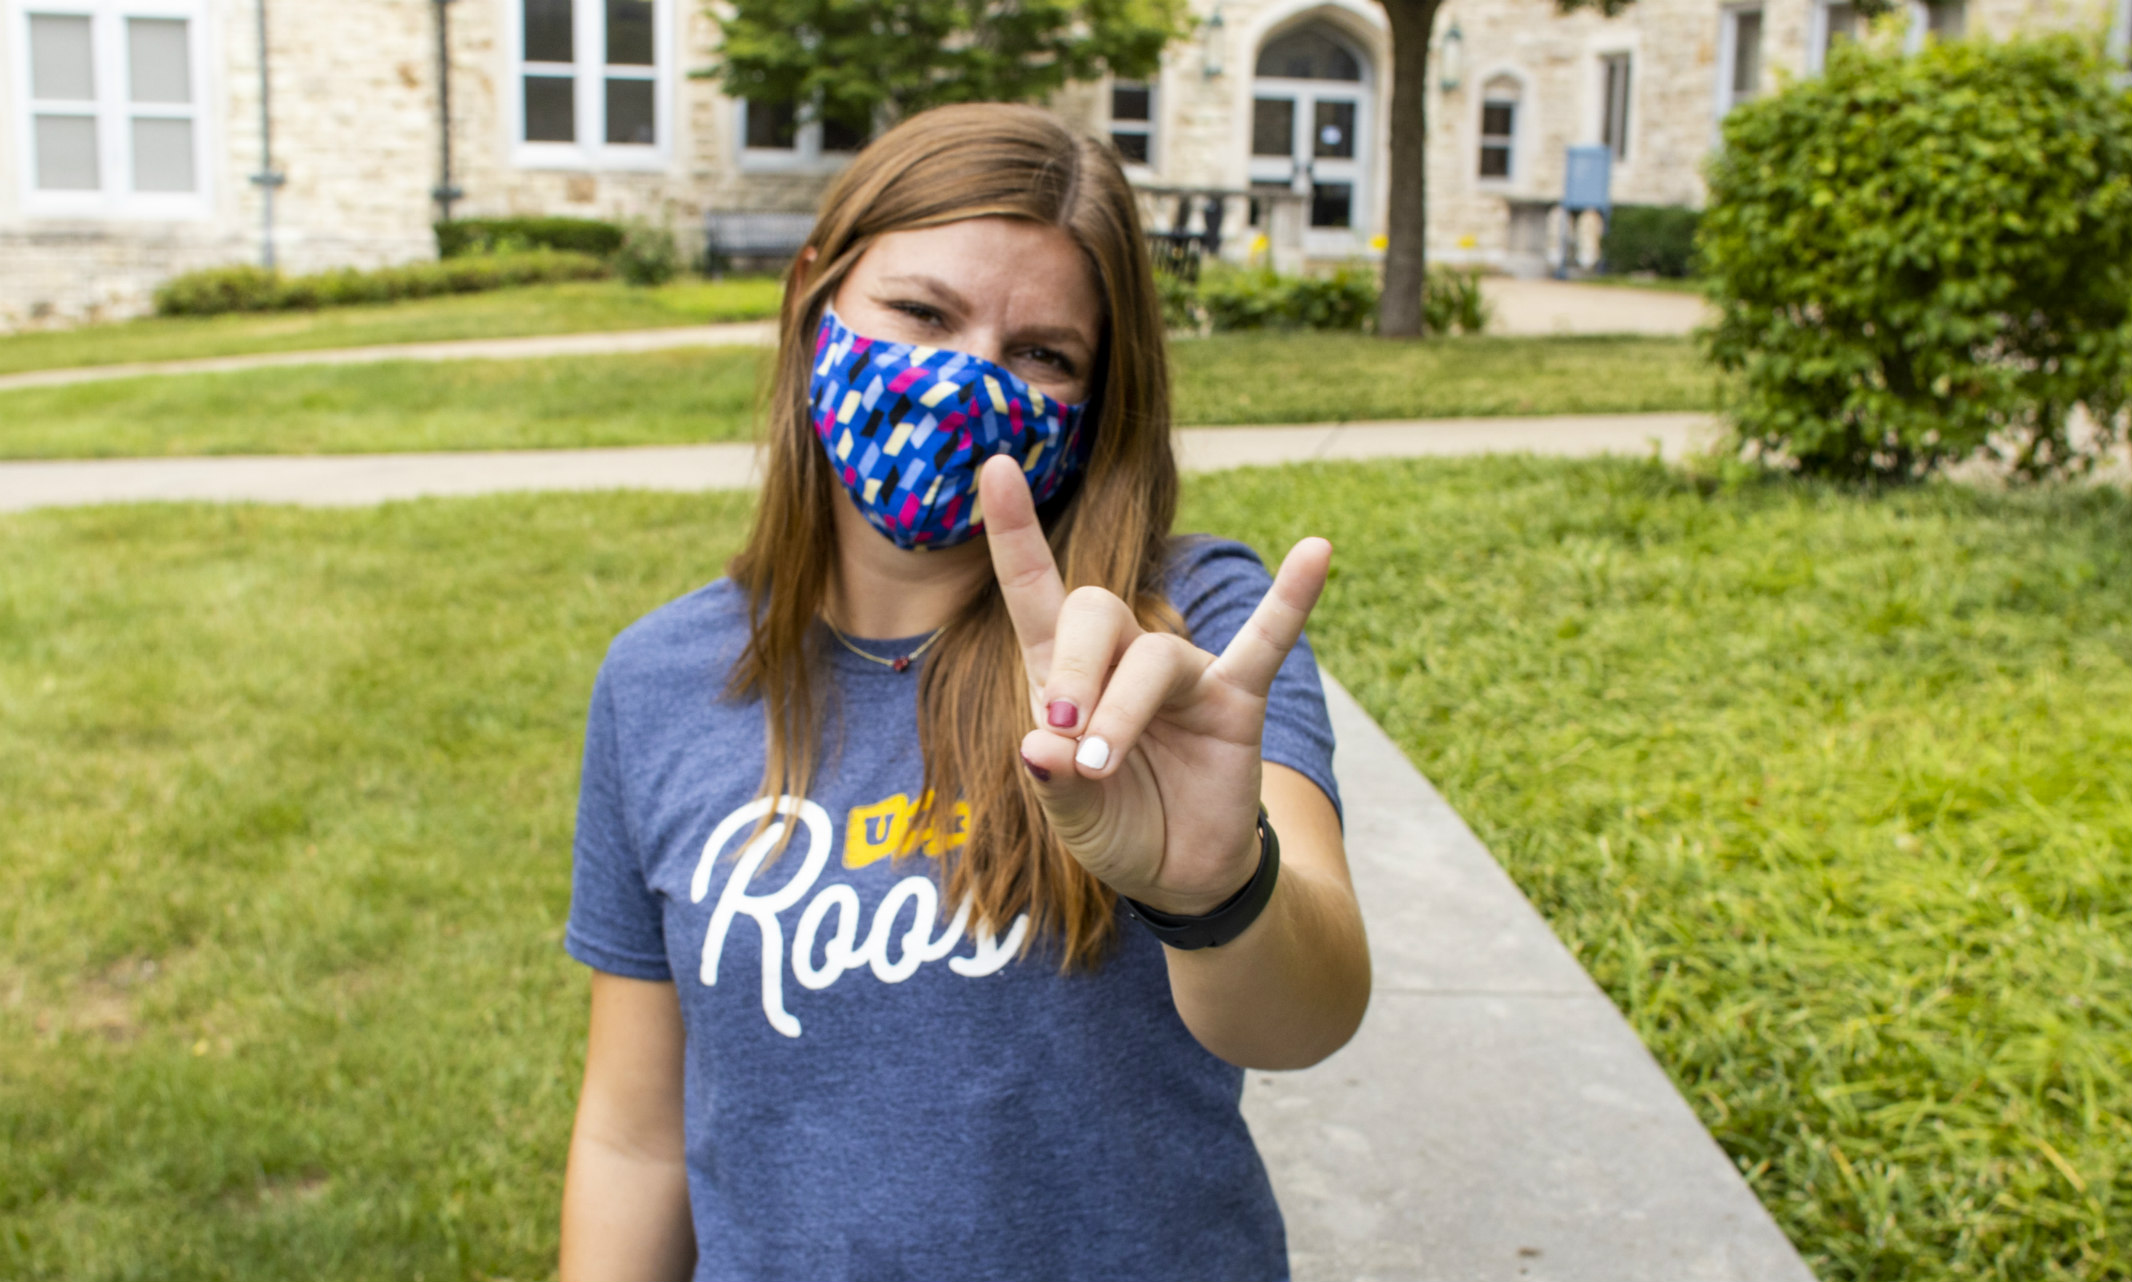 Female student wearing fce mask and flashing Roo hand sign